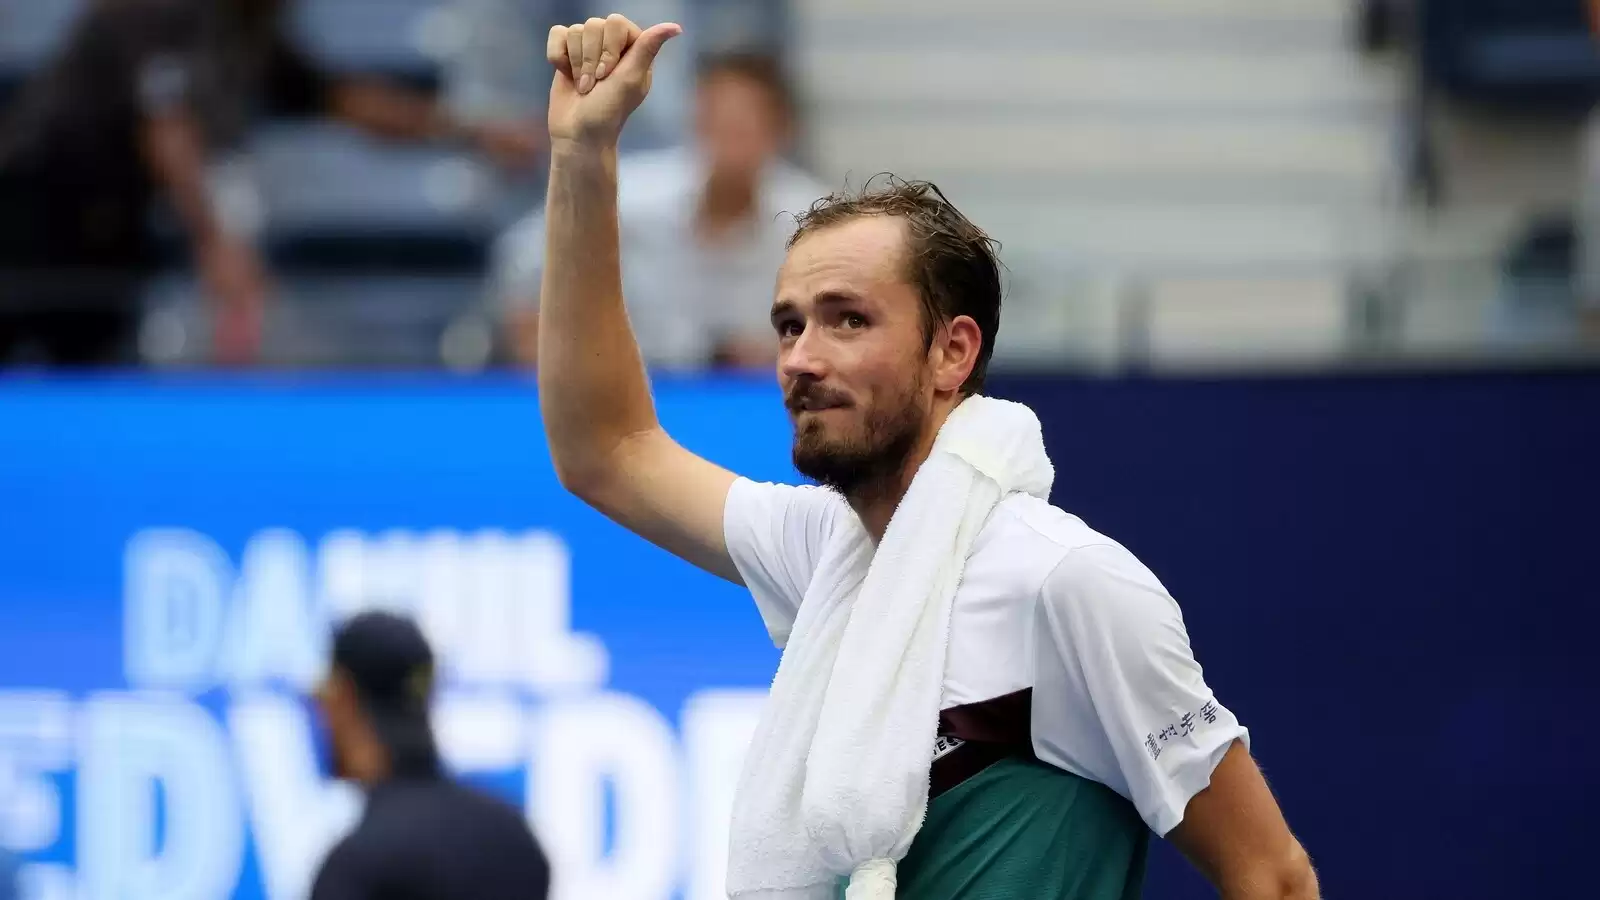 US Open: Daniil Medvedev triumphs over severe weather conditions, defeats Andrey Rublev in quarter-finals